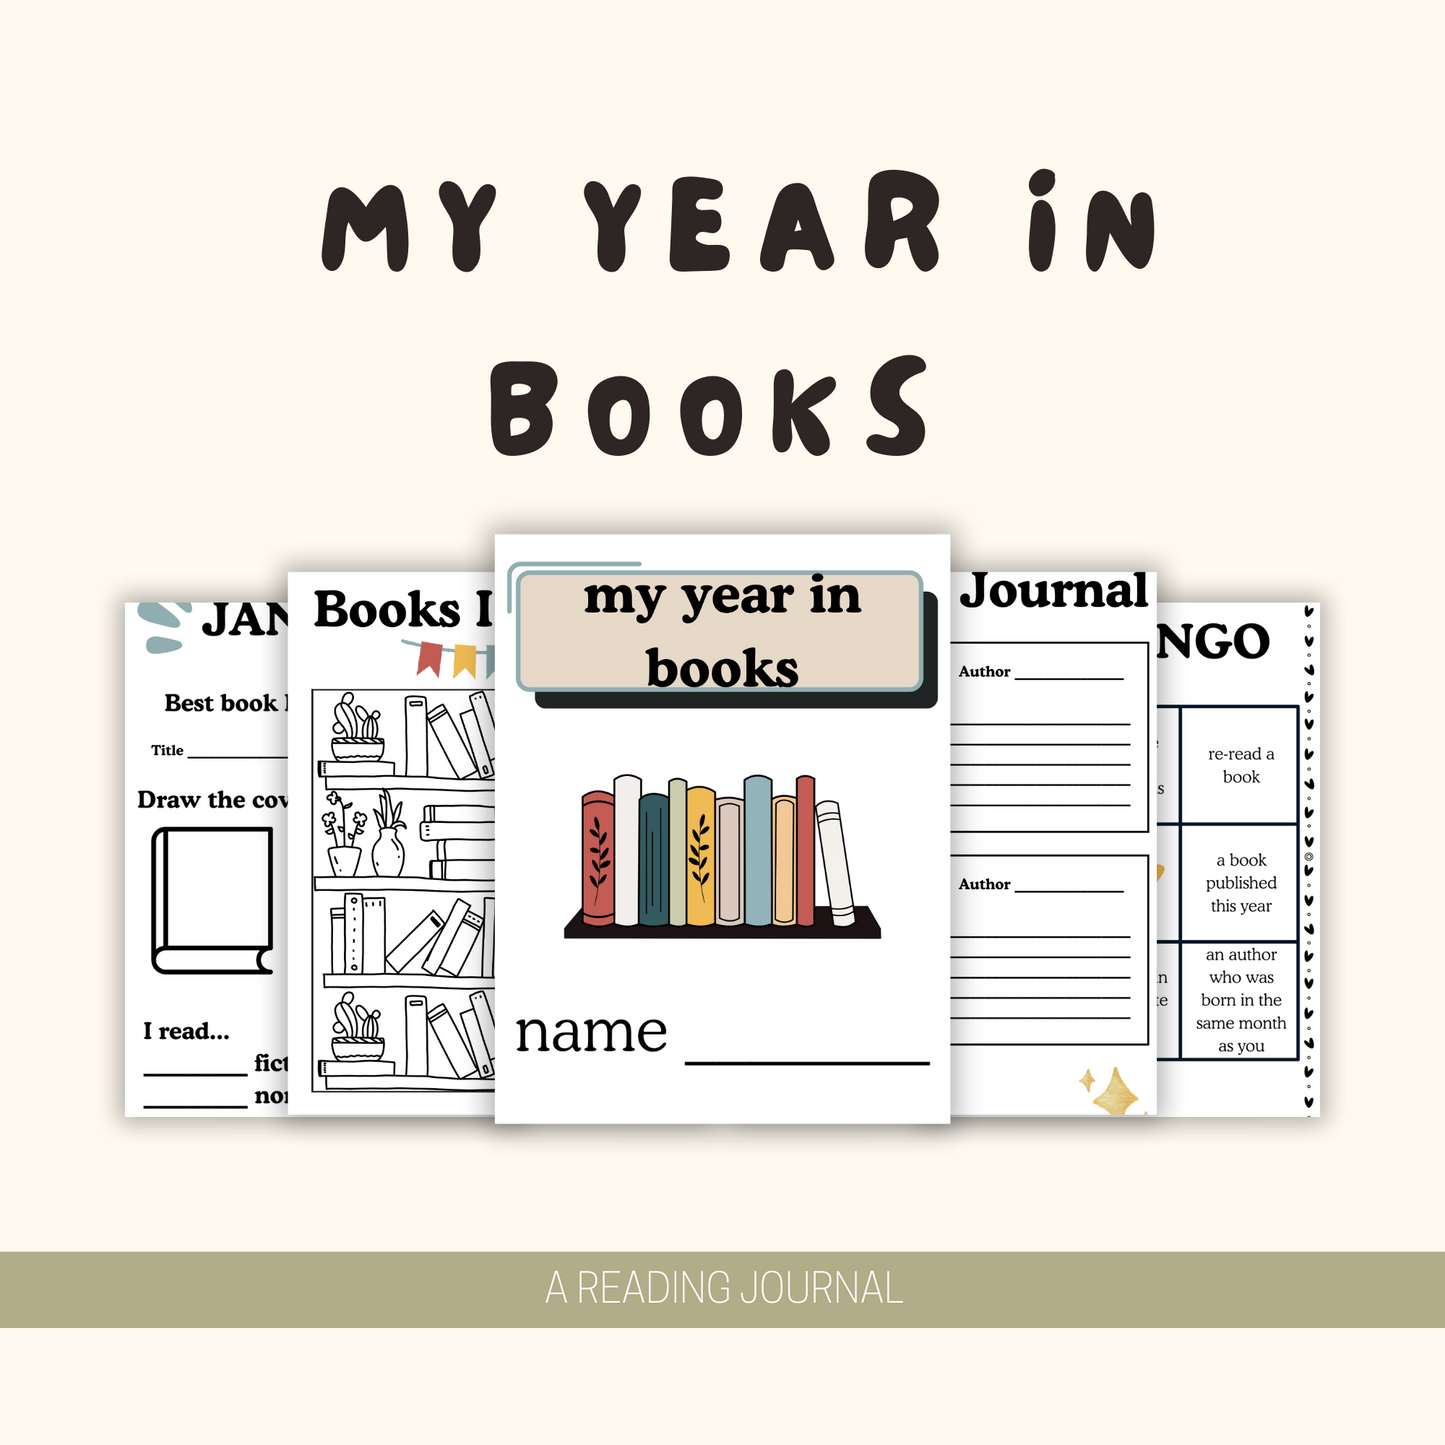 My Year in Books - Reading Journal